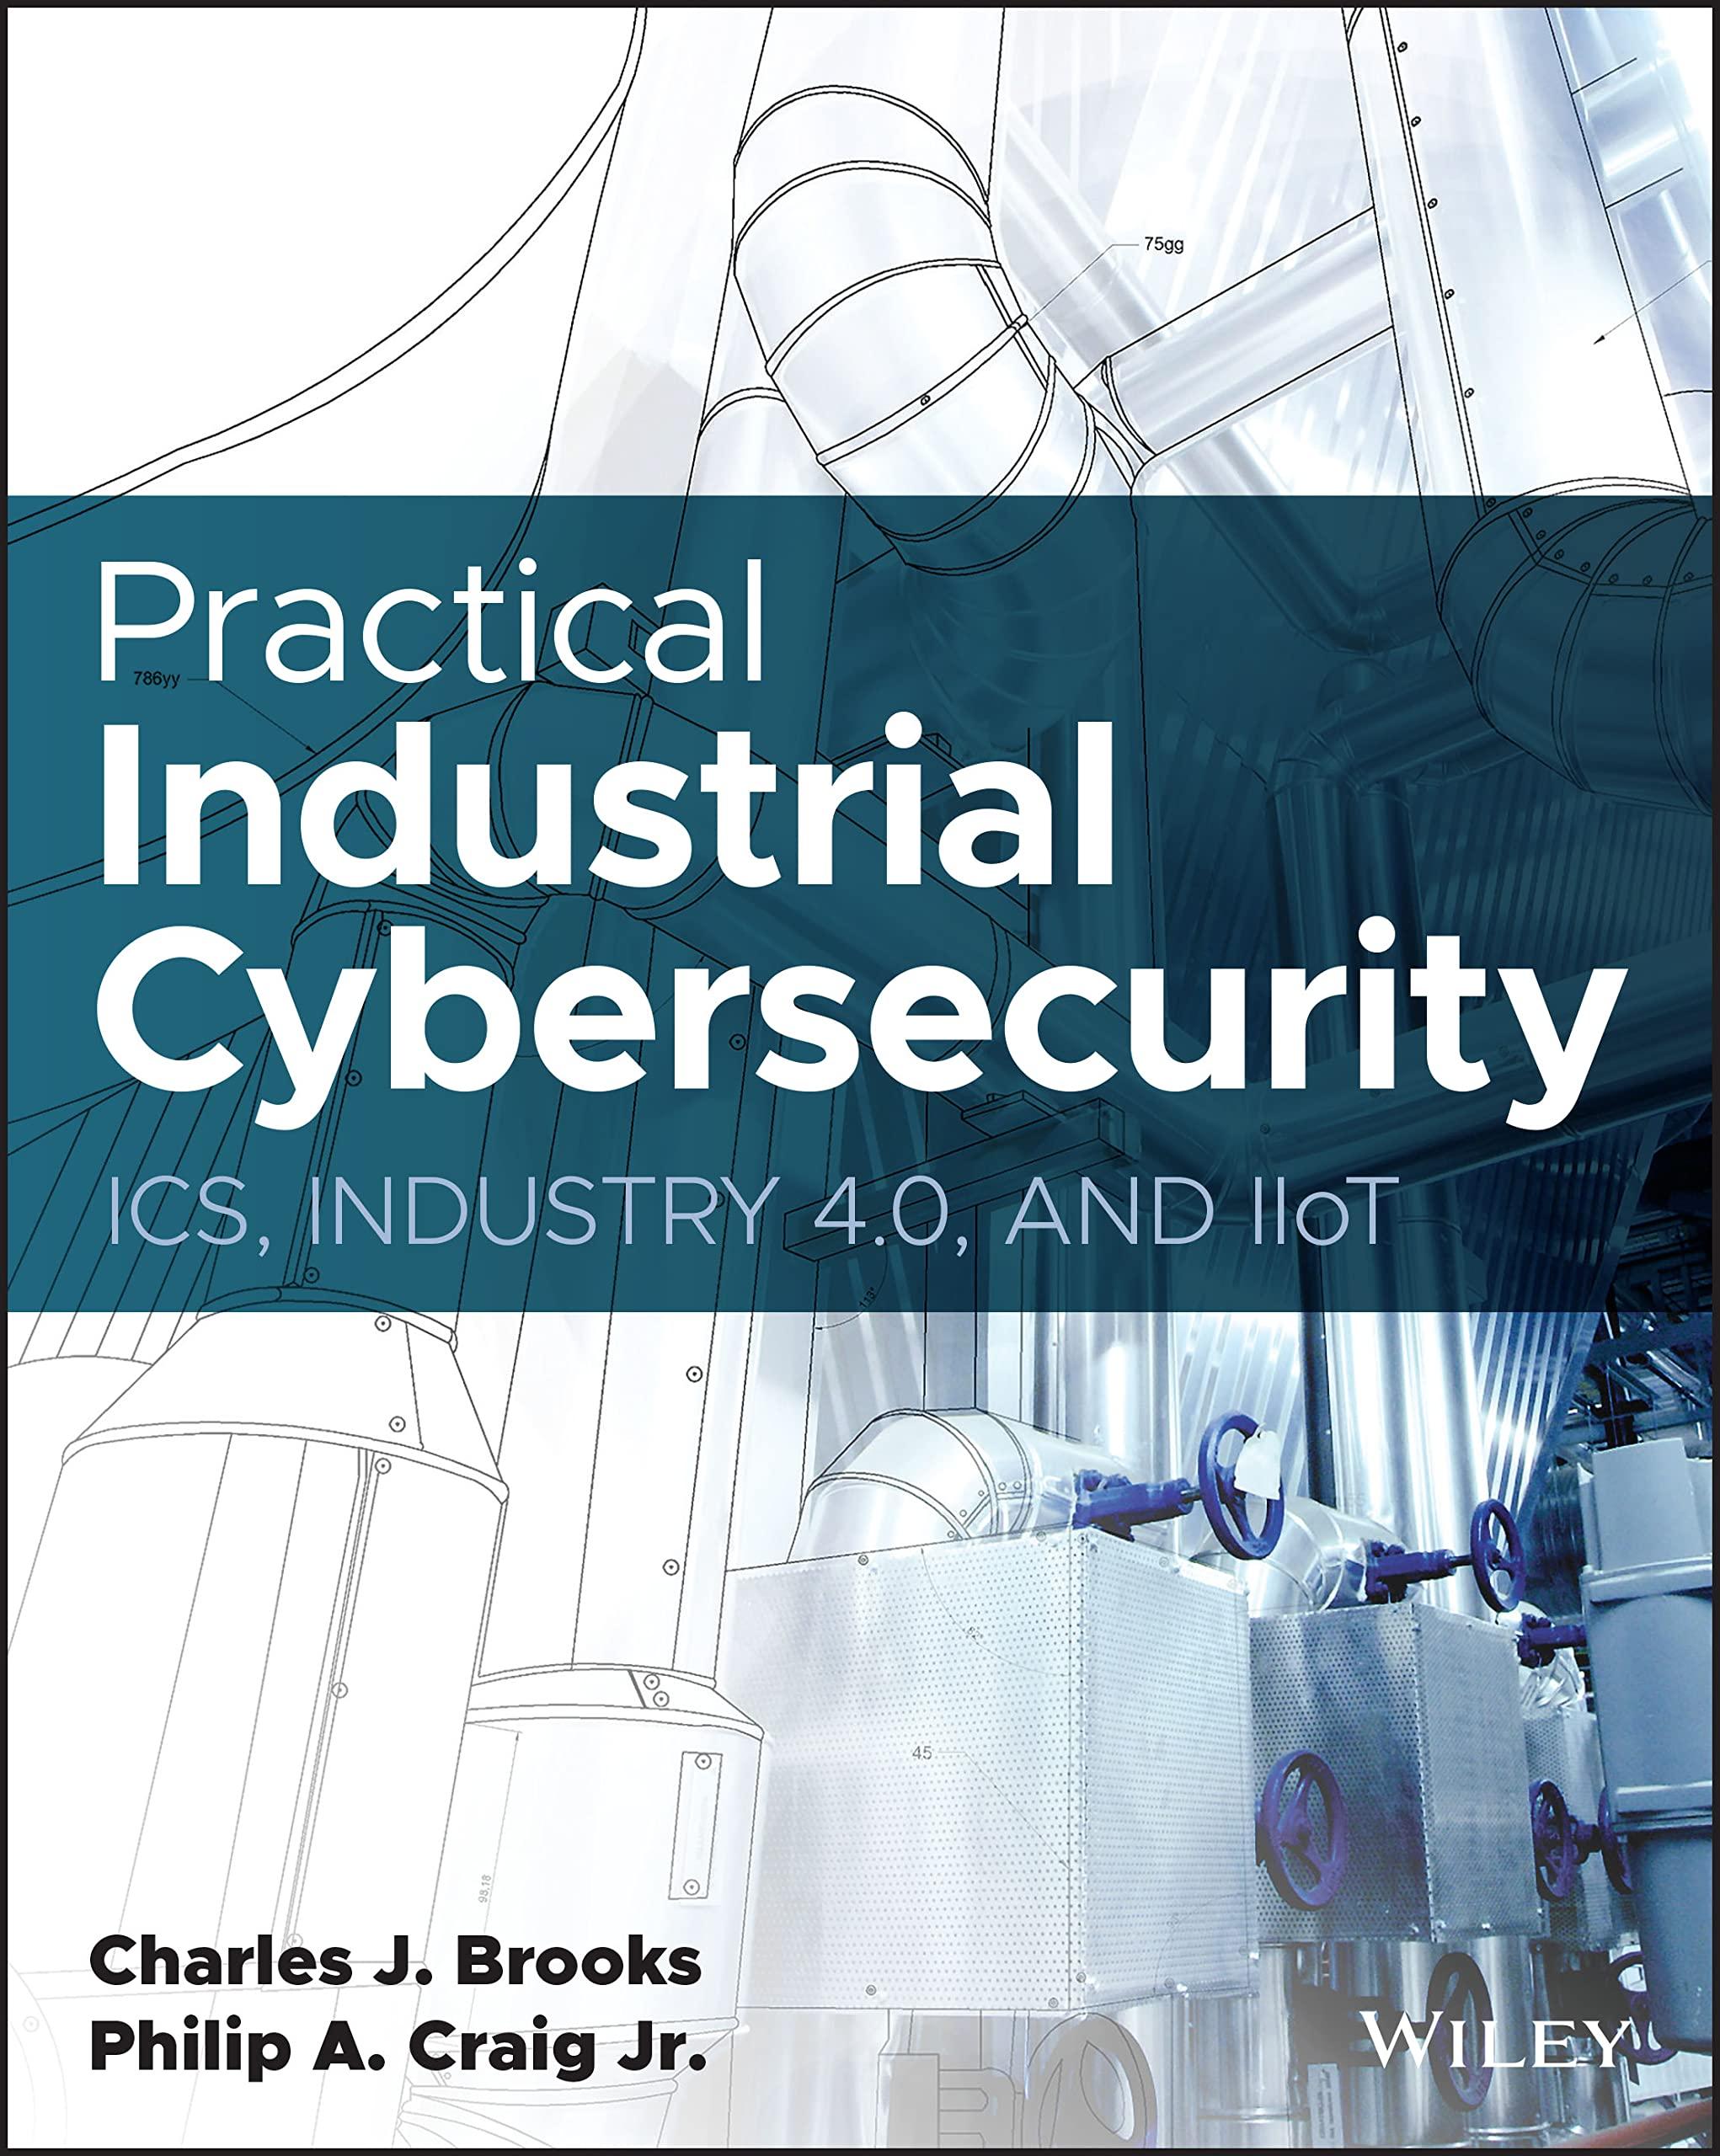 practical industrial cybersecurity ics industry 4.0 and iiot 1st edition charles j. brooks, philip a. craig